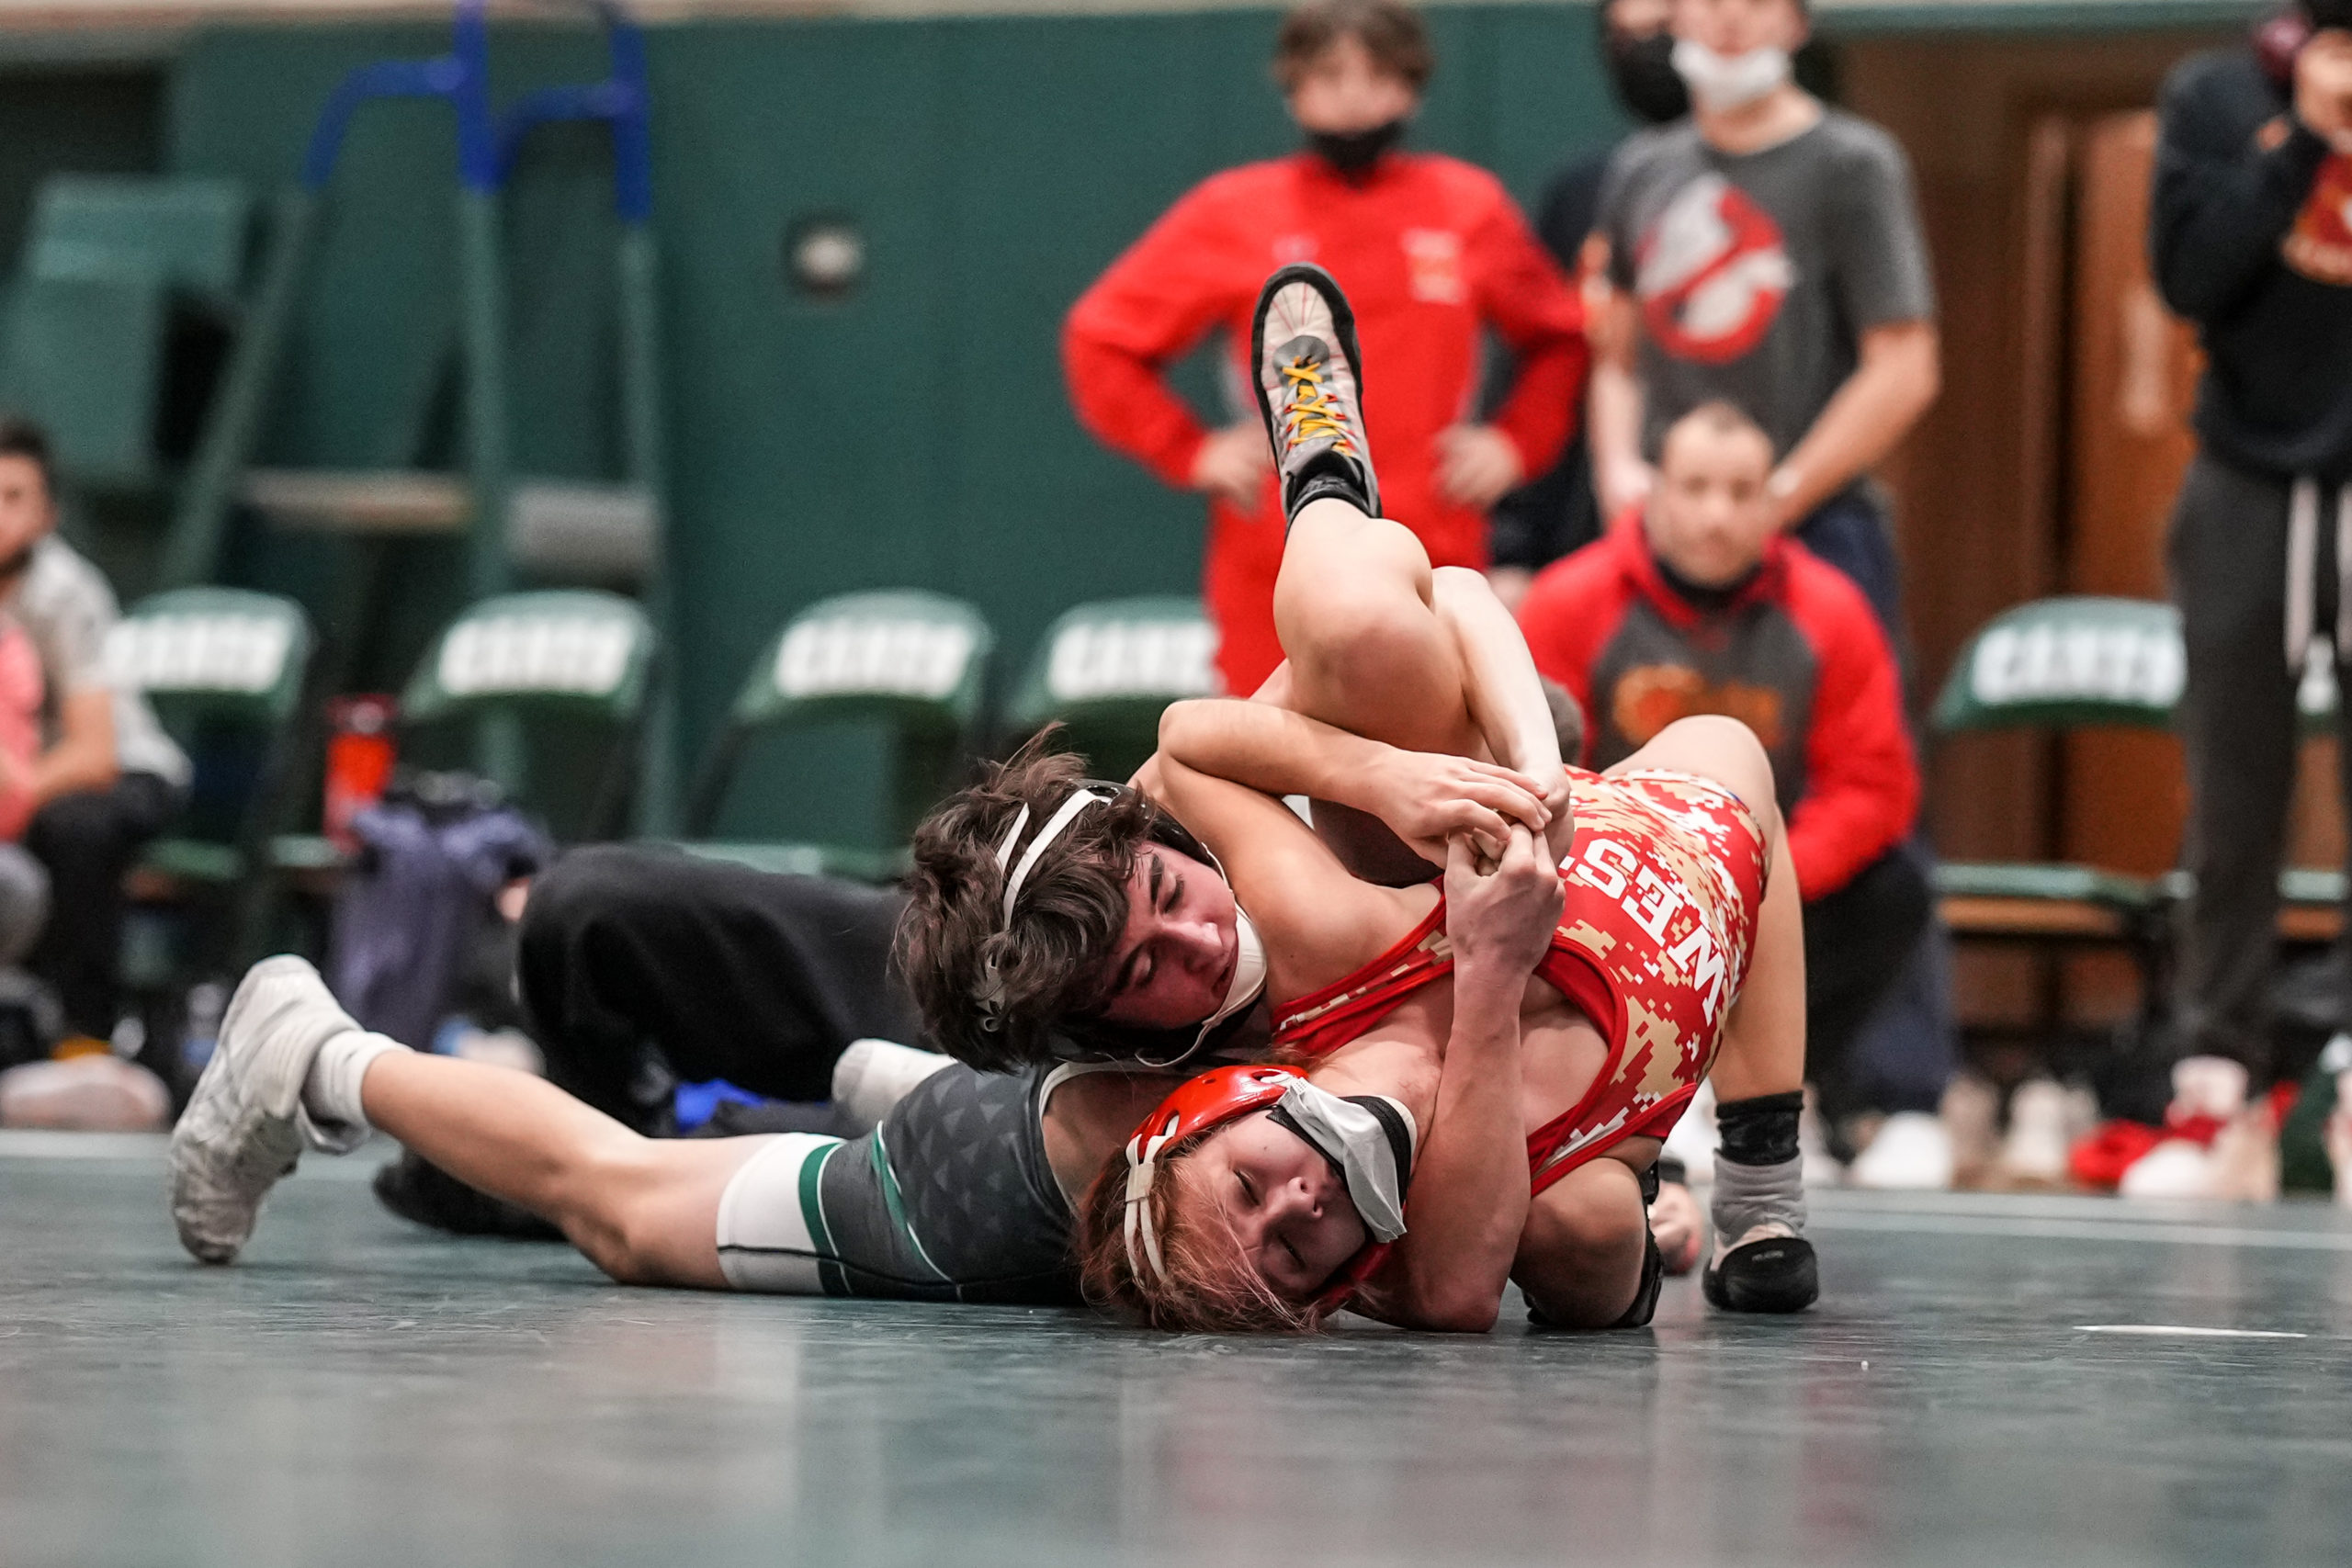 Ryan Baynon of Westhampton Beach earns some points against Madeline Ridge of Hills West.